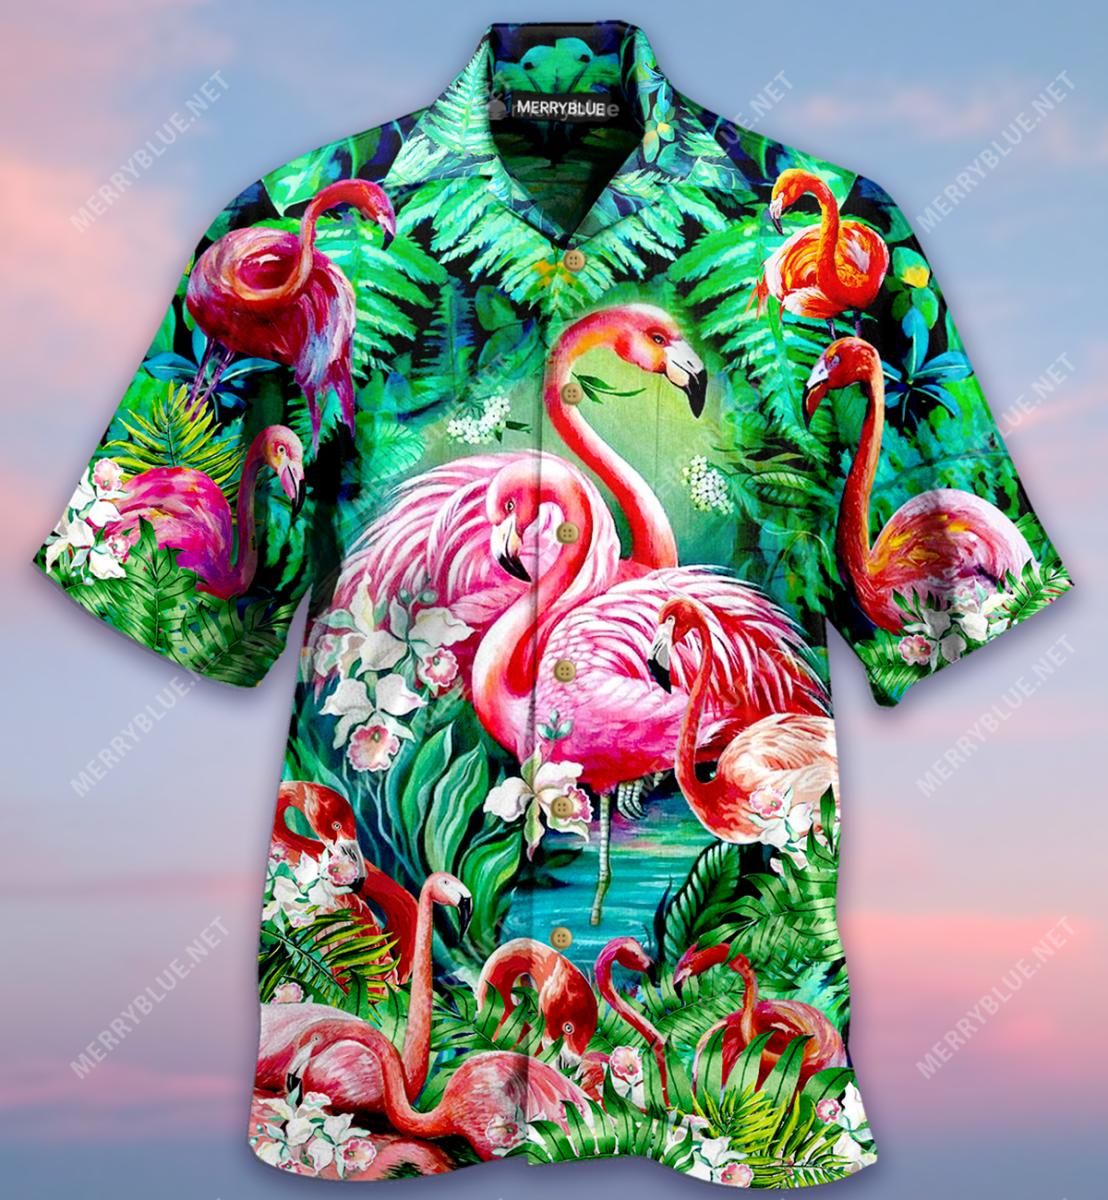 Flamingo Why Fit In When You Were Born To Stand Out Aloha Hawaiian Shirt Colorful Short Sleeve Summer Beach Casual Shirt For Men And Women